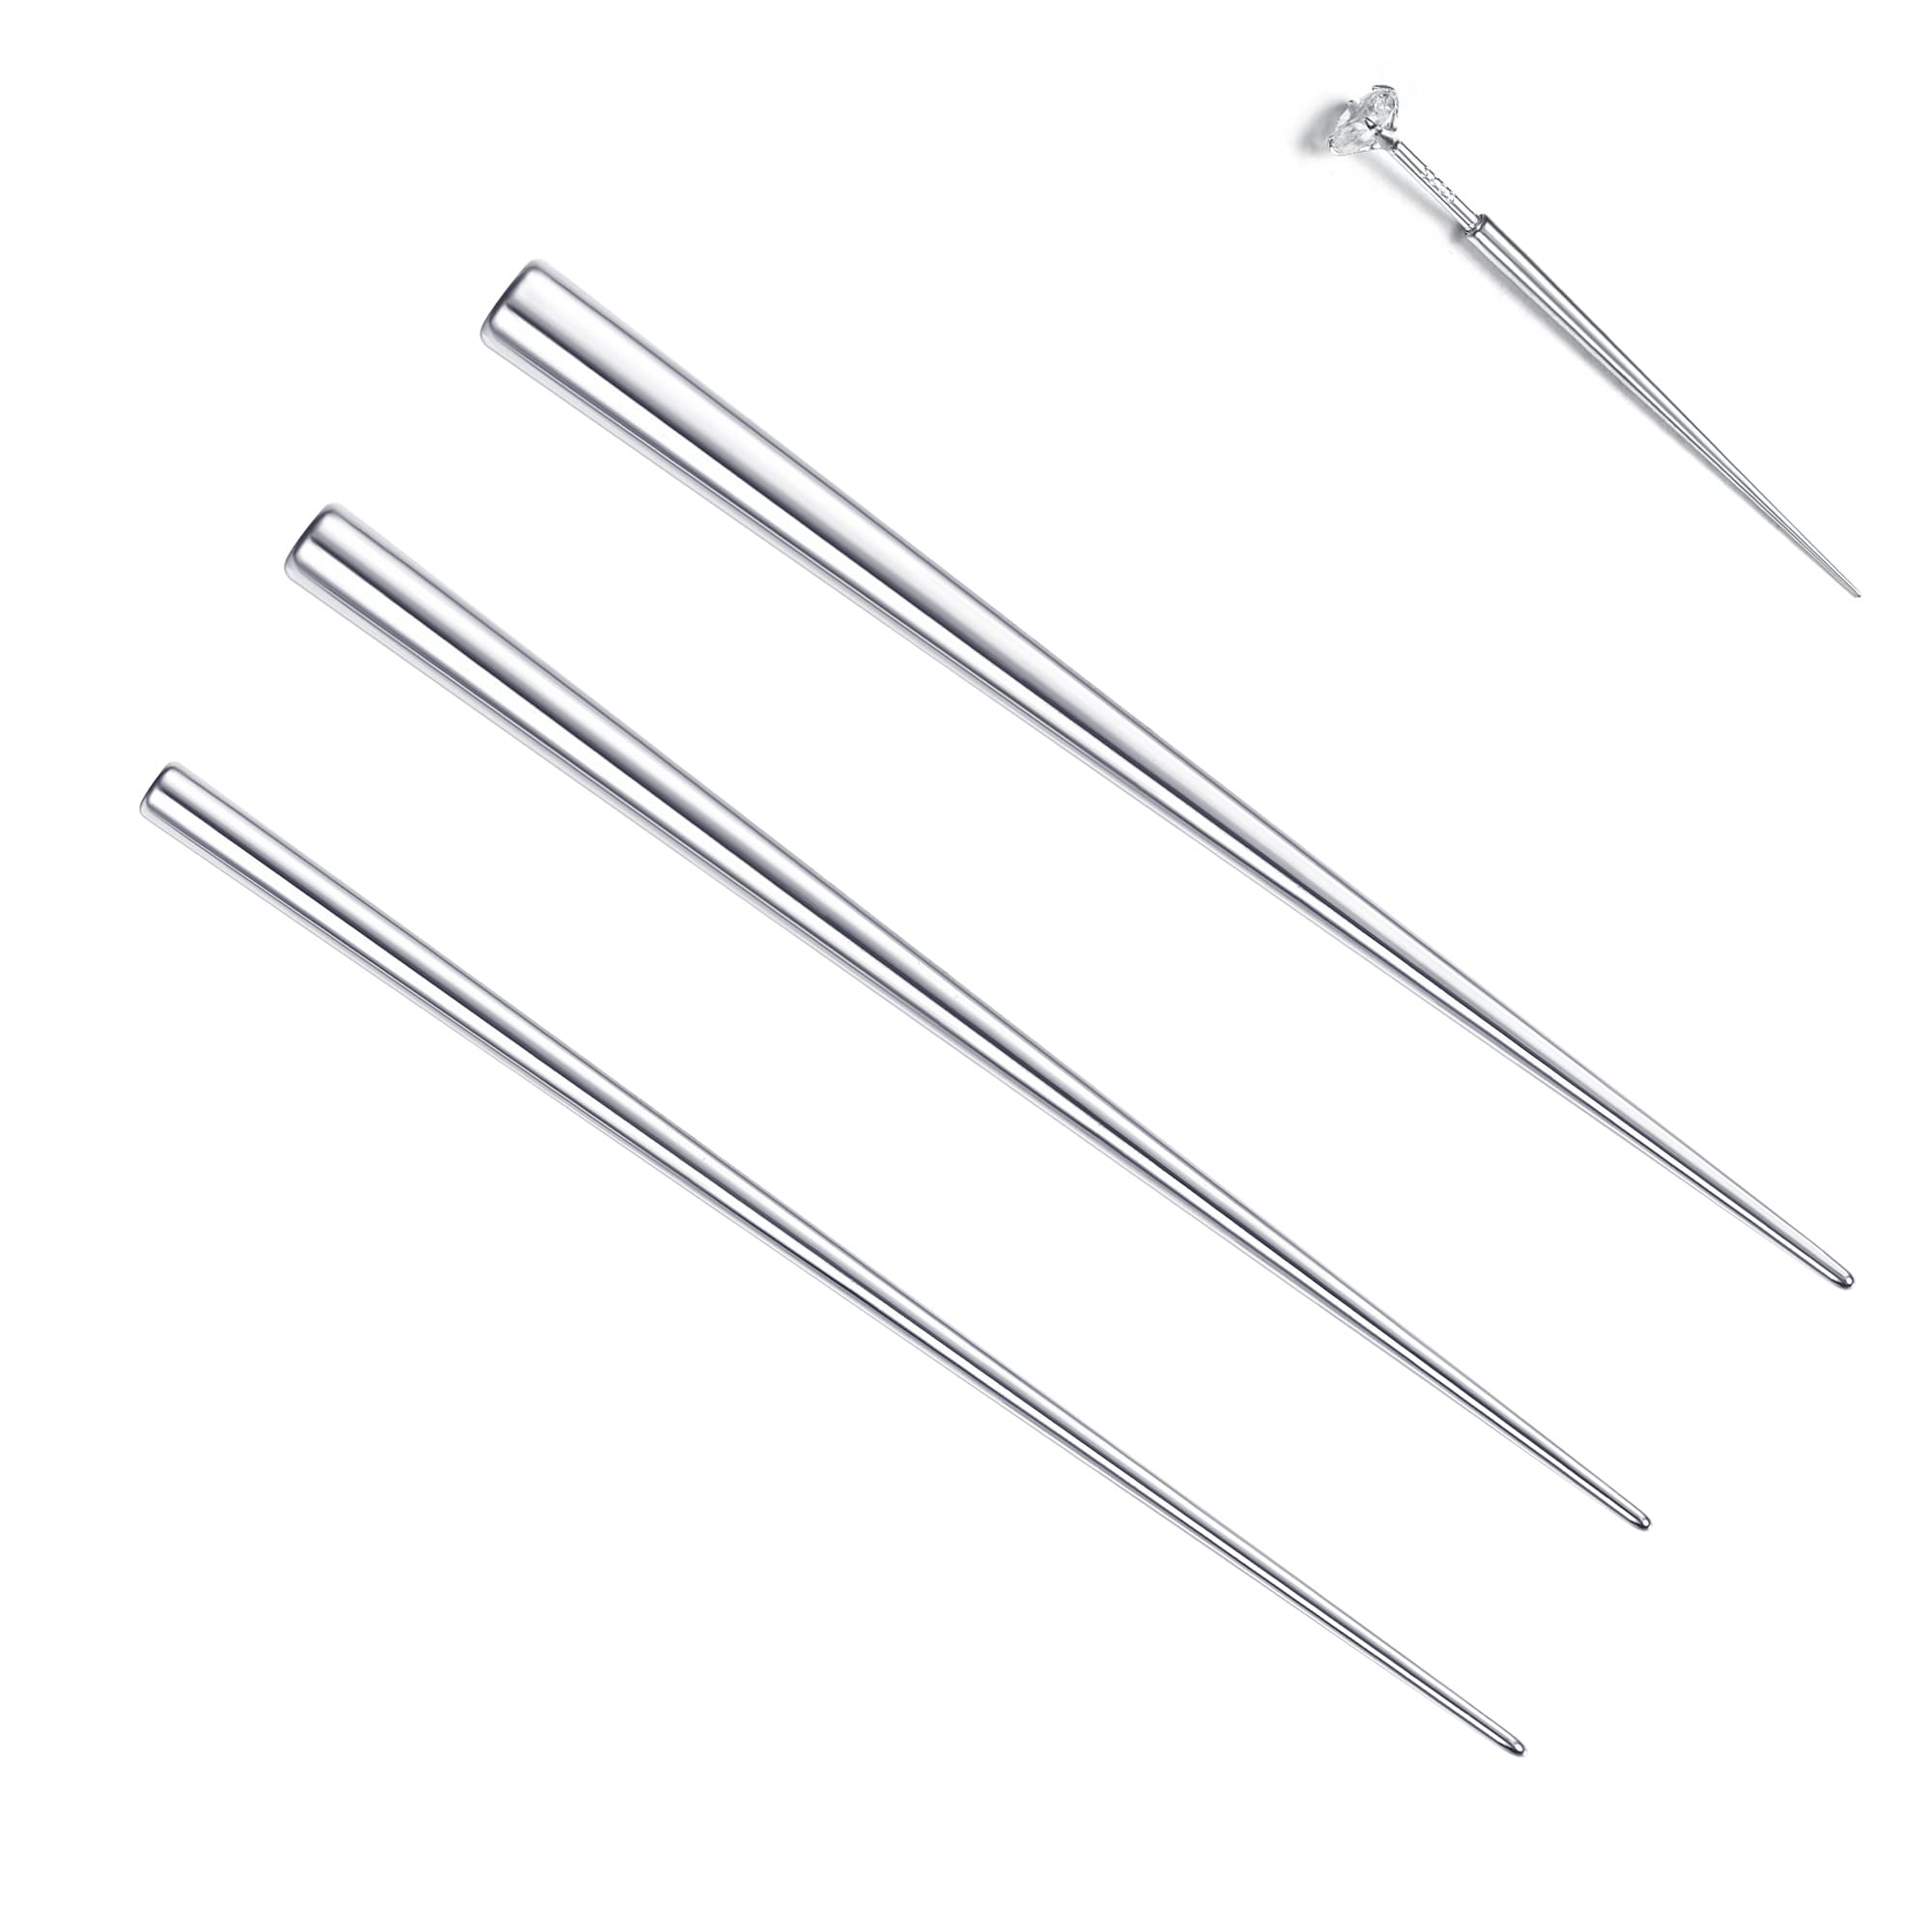 BESTEEL 3 Pcs 316L Surgical Steel Piercing Taper Insertion Pins, Pop Taper Piercings Kit for Ear/Nose/Lip/Eyebrow/Belly/Nipple/Tongue Piercing Changing Tool Stretcher, Body Piercing Kit Assistant Tool 14G 16G 18G External/Threadless/Internal Thread Bar